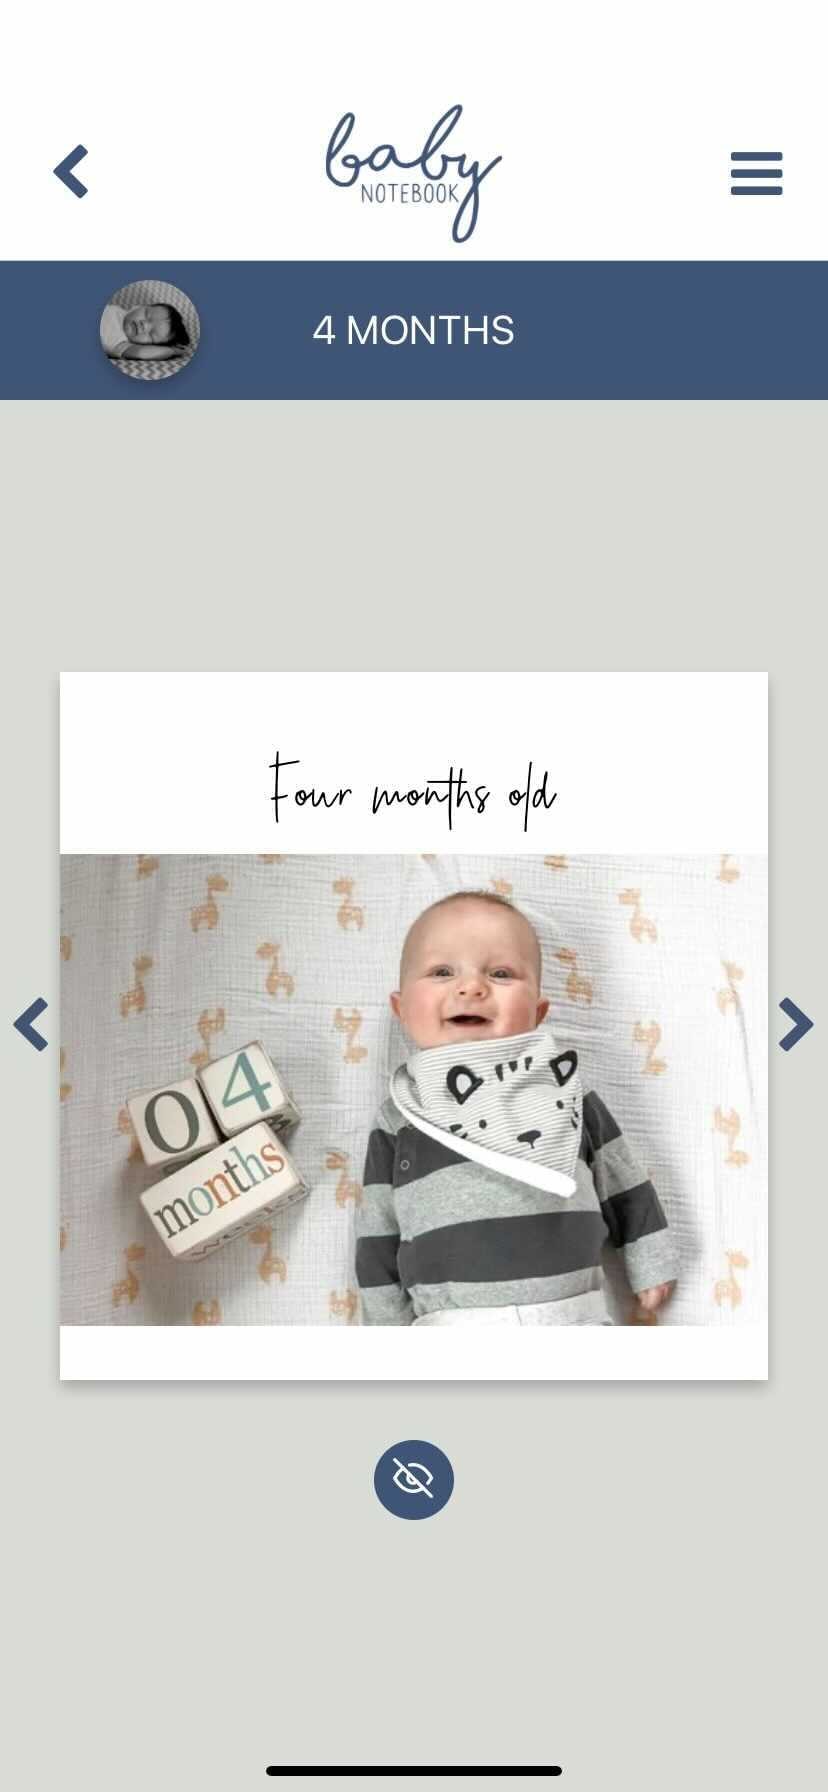 Phone screenshot of 4-month-old page of the baby's first year book in the baby book app